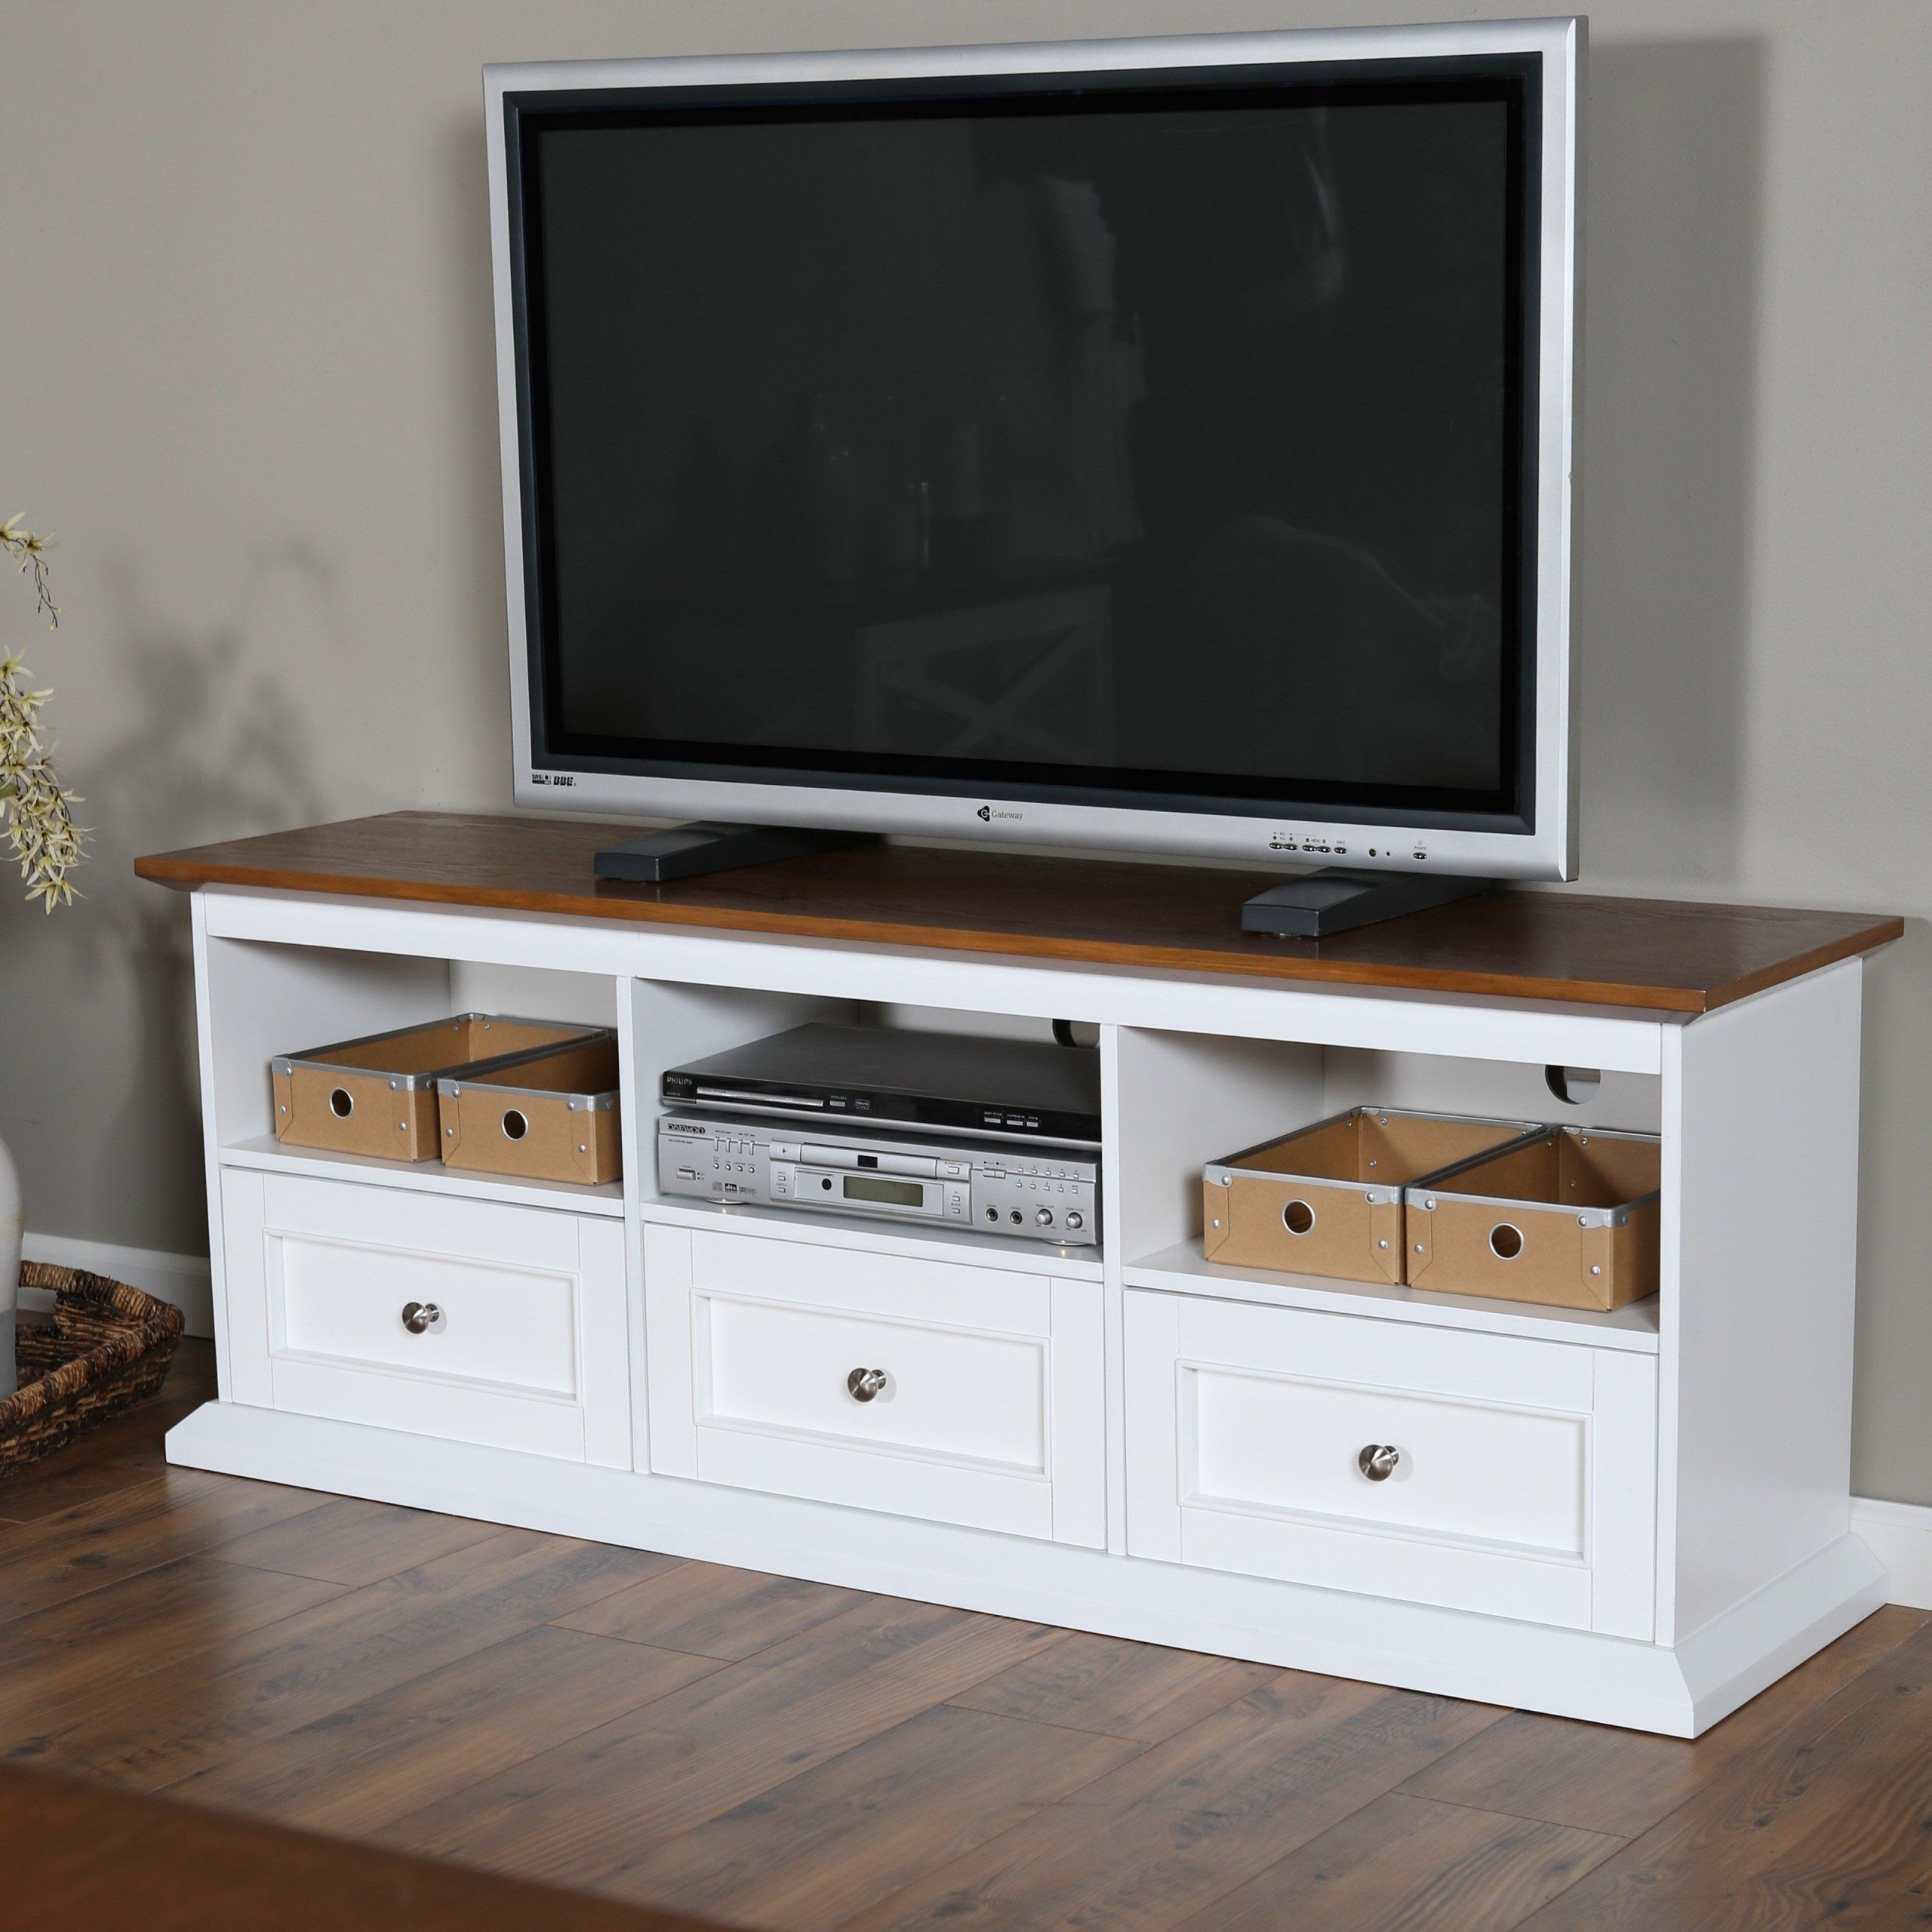 Coffee Tables | Shop At Hayneedle | Tv Stand With Regarding Long Low Tv Cabinets (View 6 of 15)